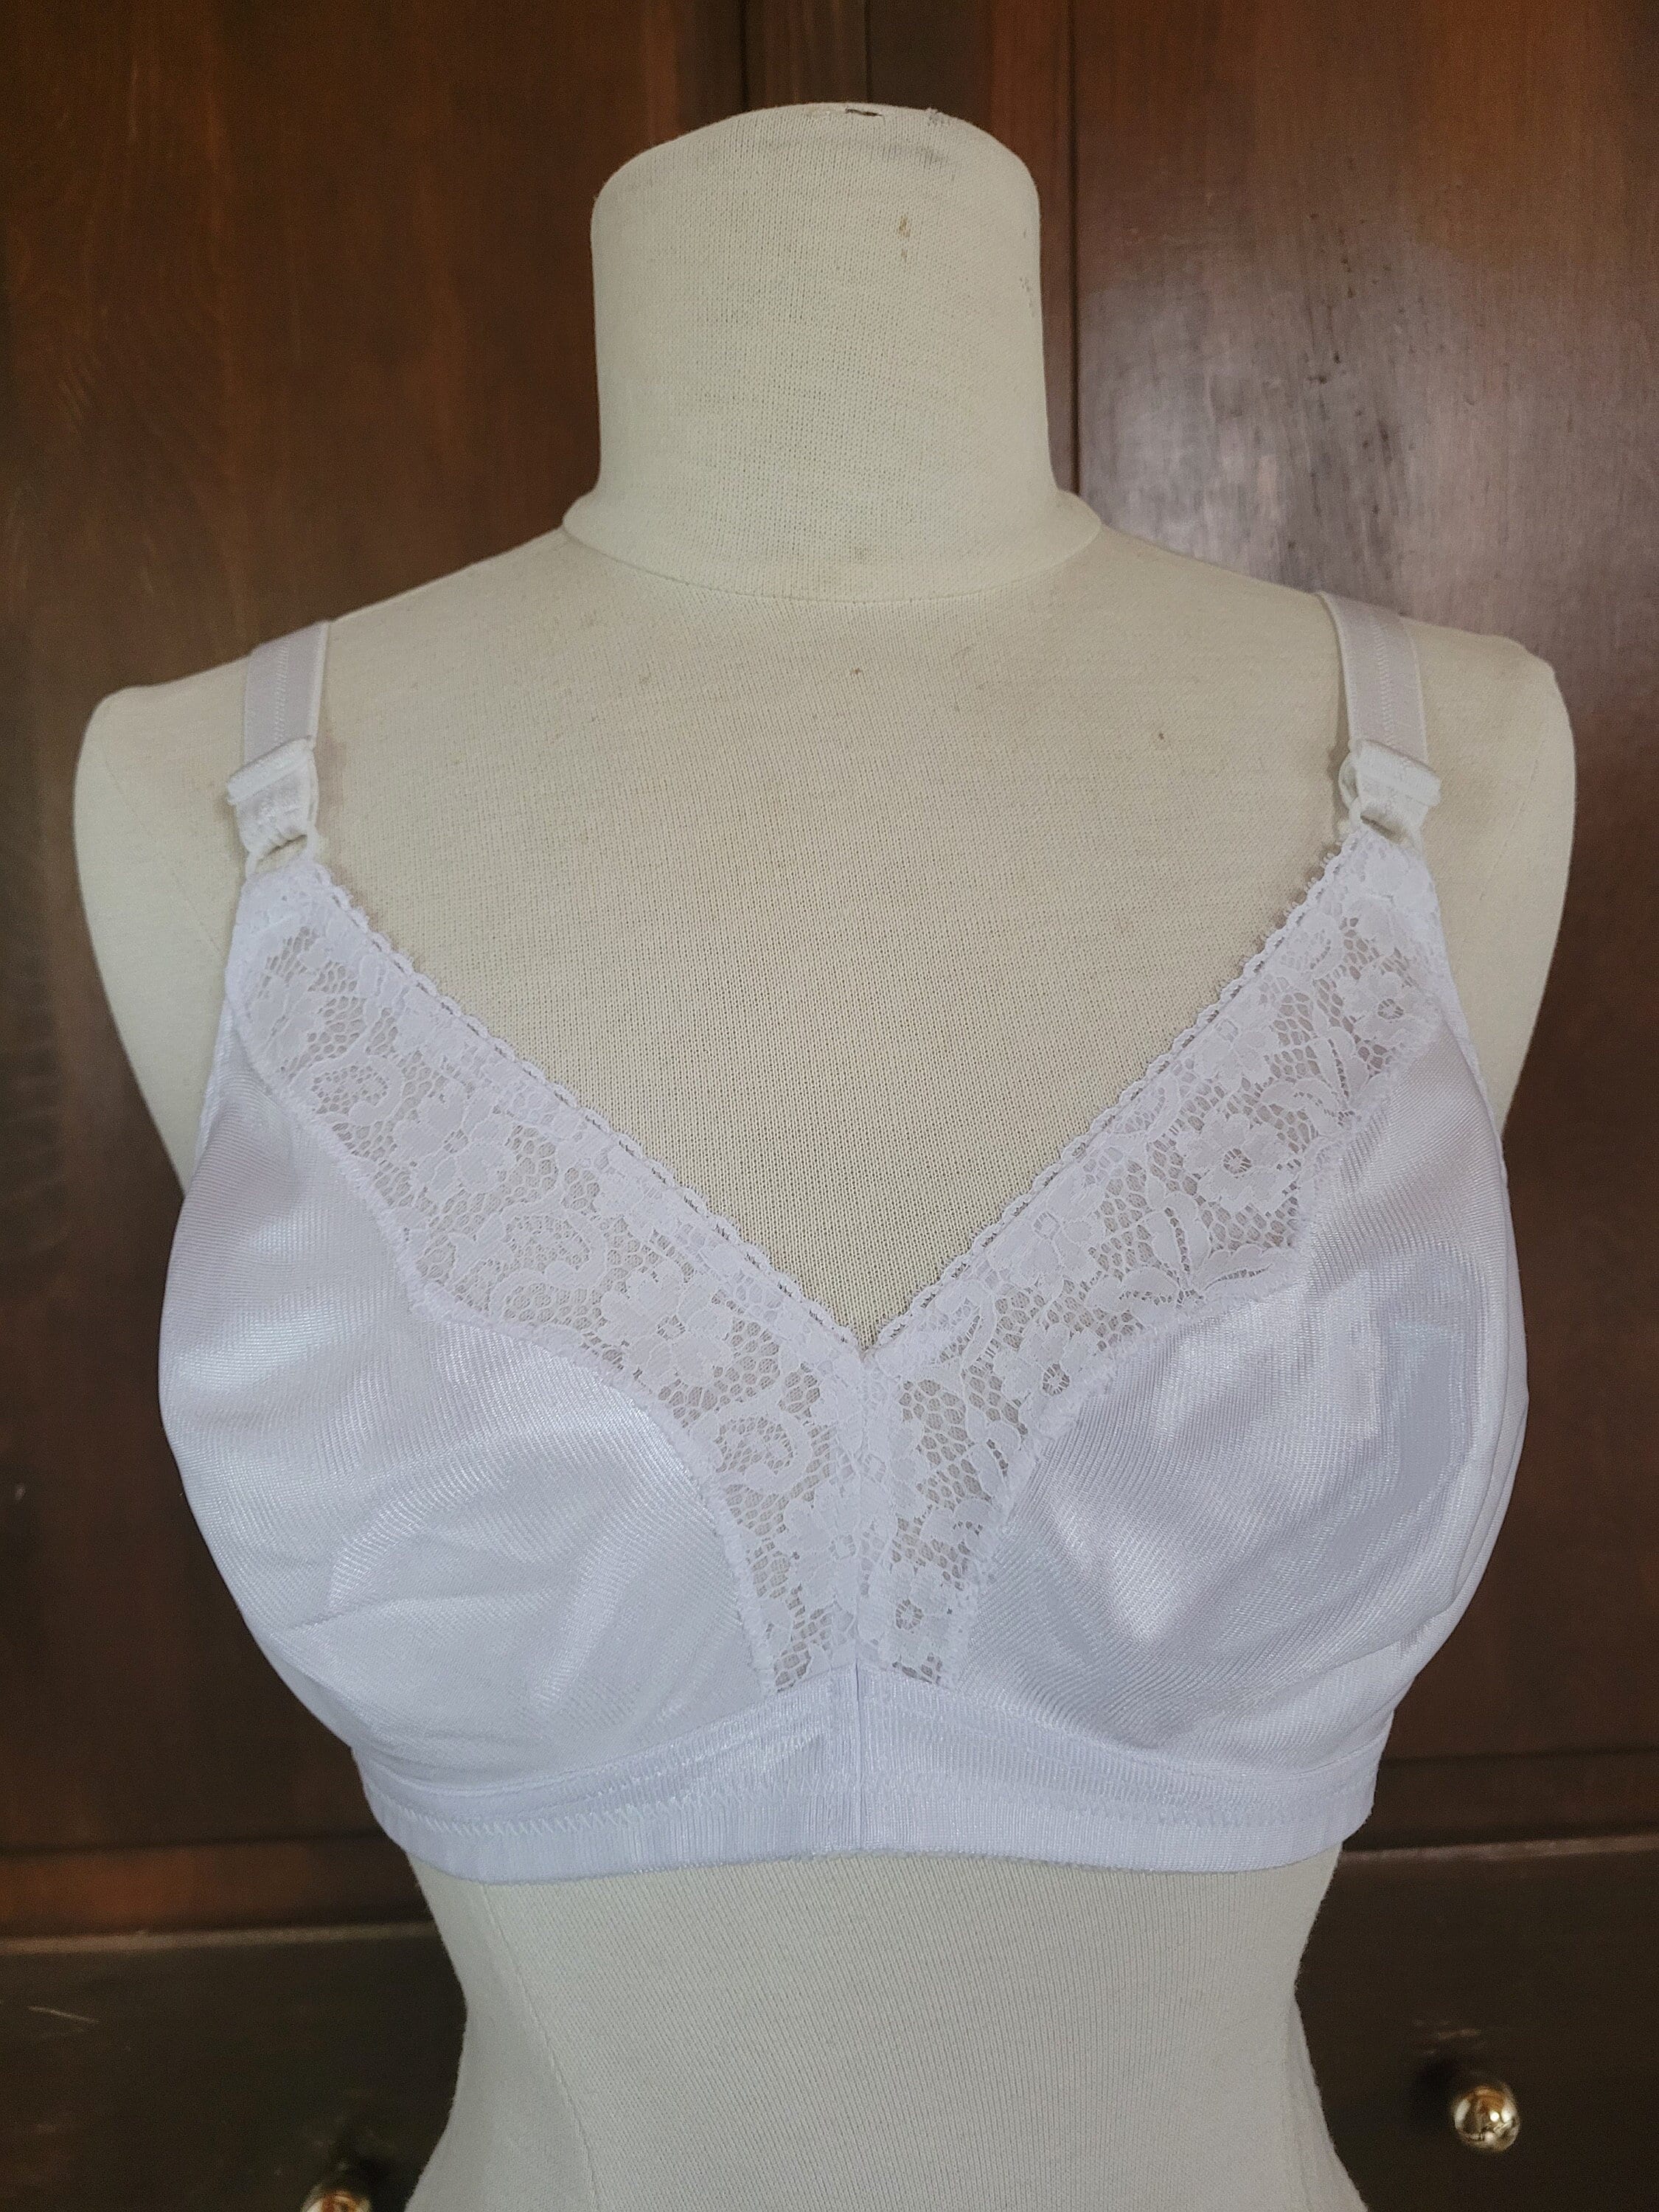 40C CROSS-YOUR-HEART Vintage Playtex Womens and 50 similar items